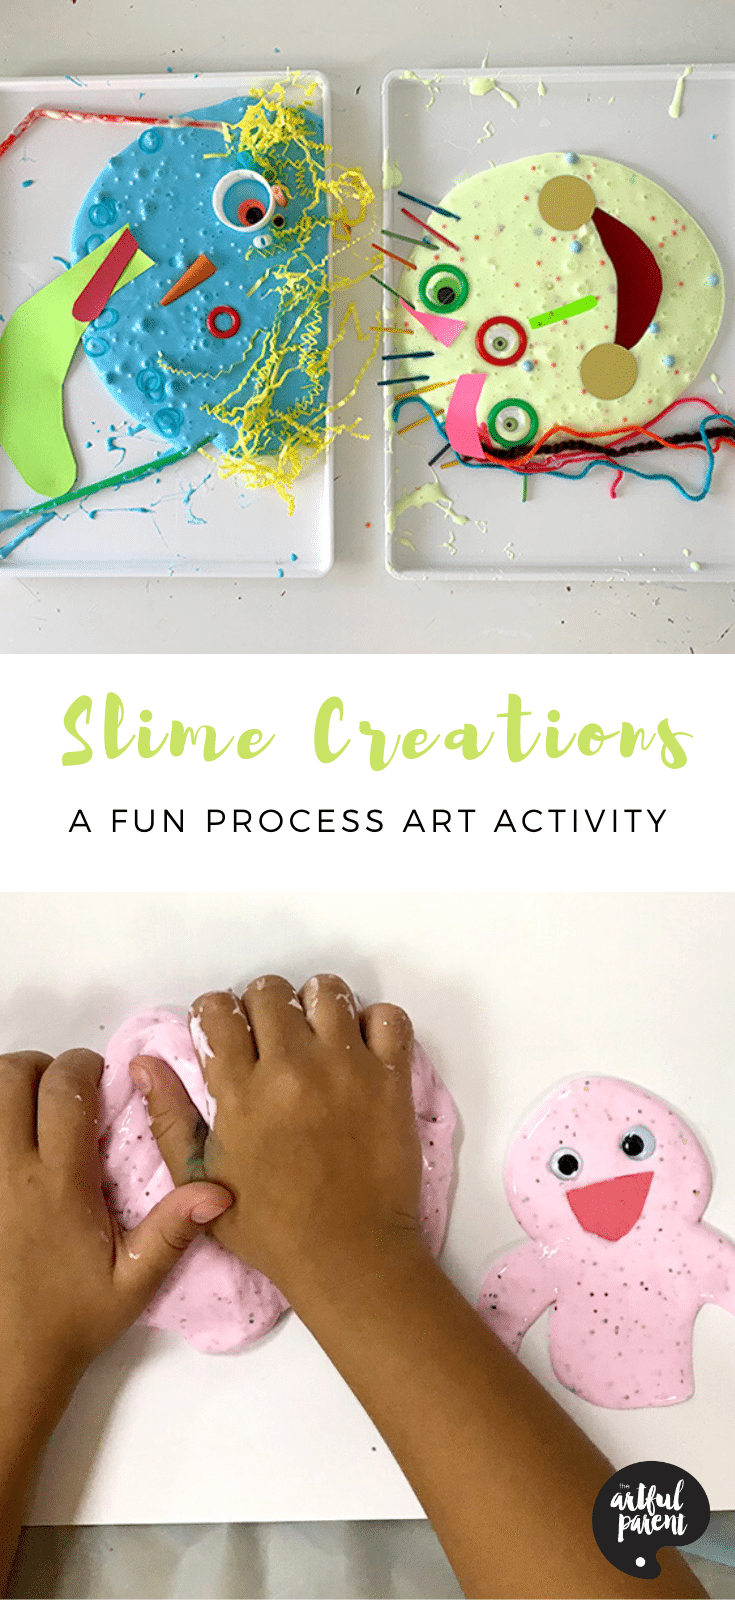 How to Make Slime Creations for Kids _ Pinterest